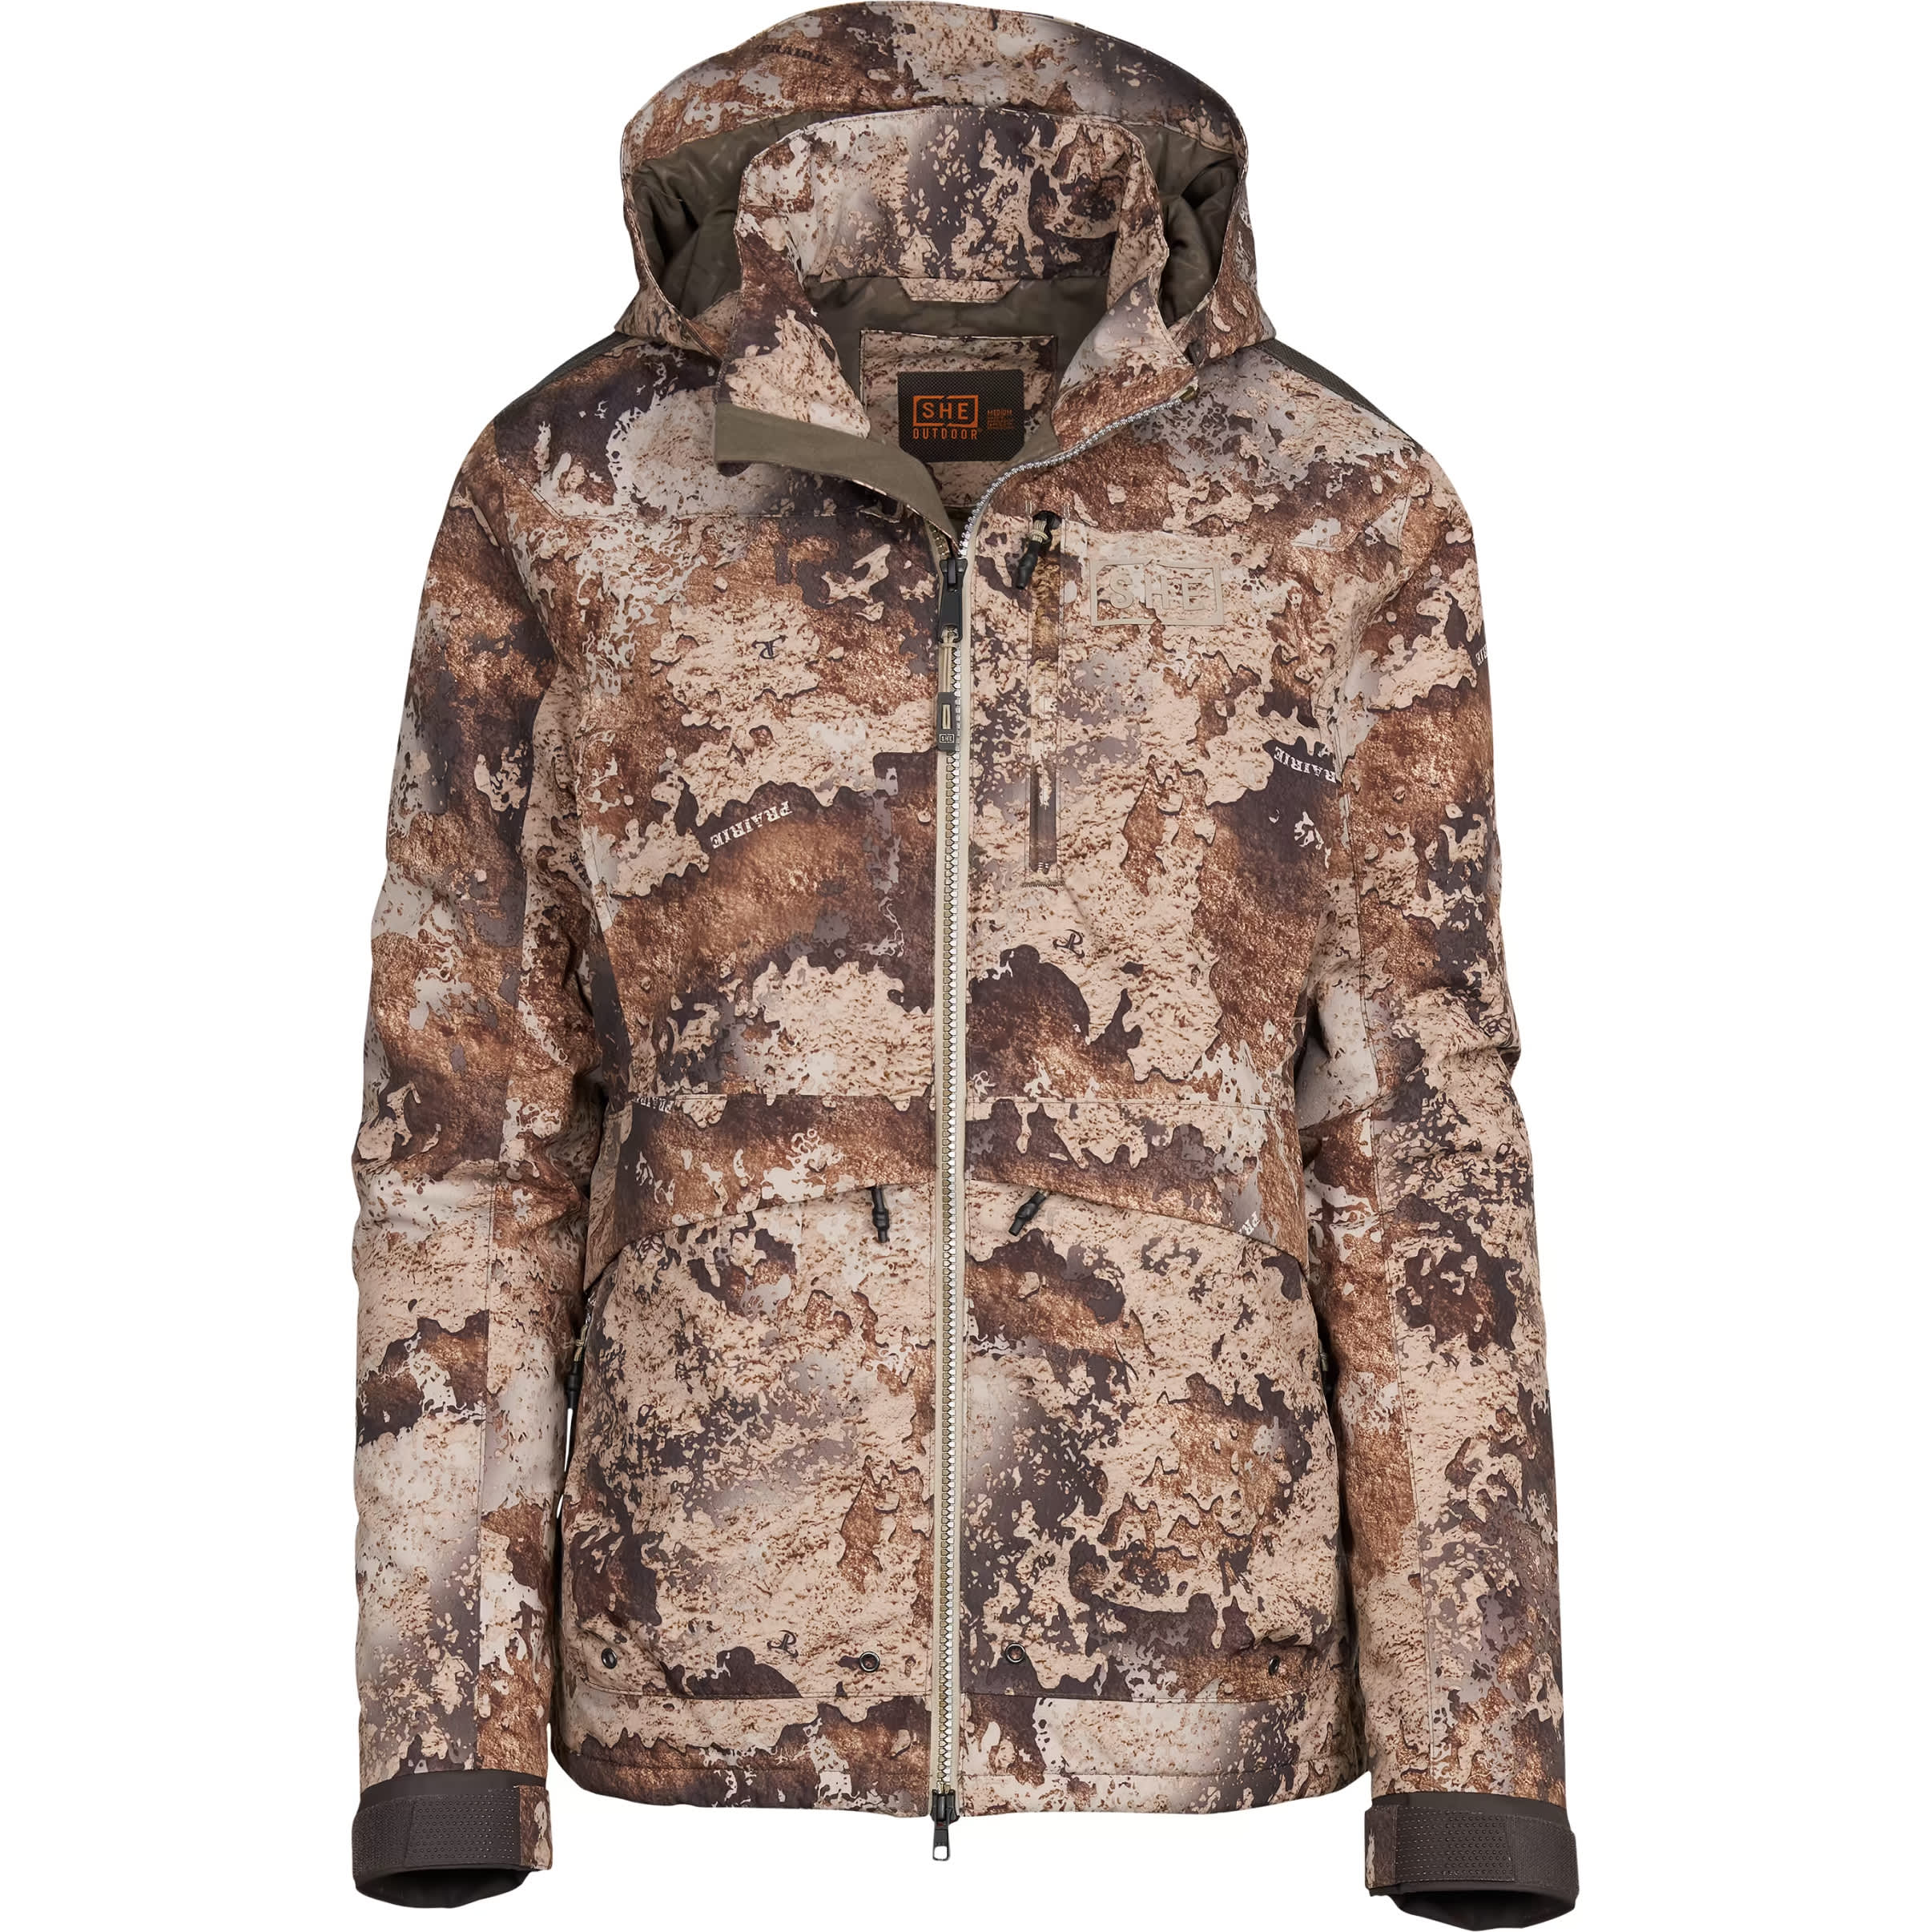 SHE Outdoor® Women’s Confluence Insulated Waterfowl Jacket